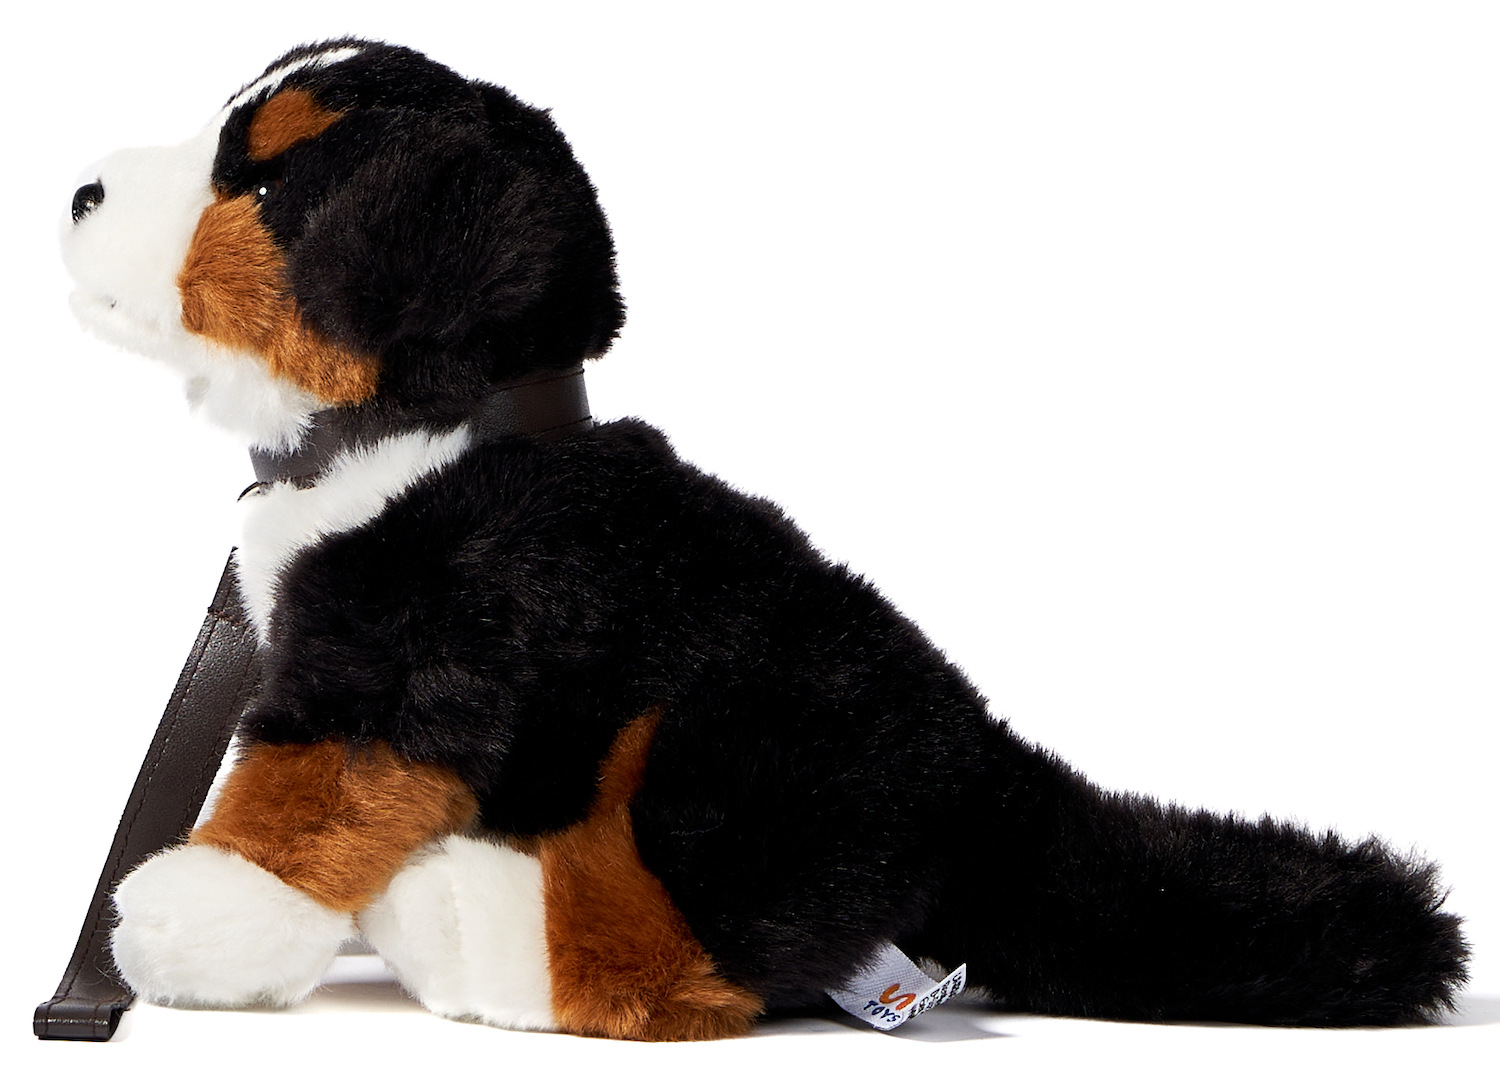 Bernese Mountain Dog Puppy, Sitting, With Leash - 19 cm (height)